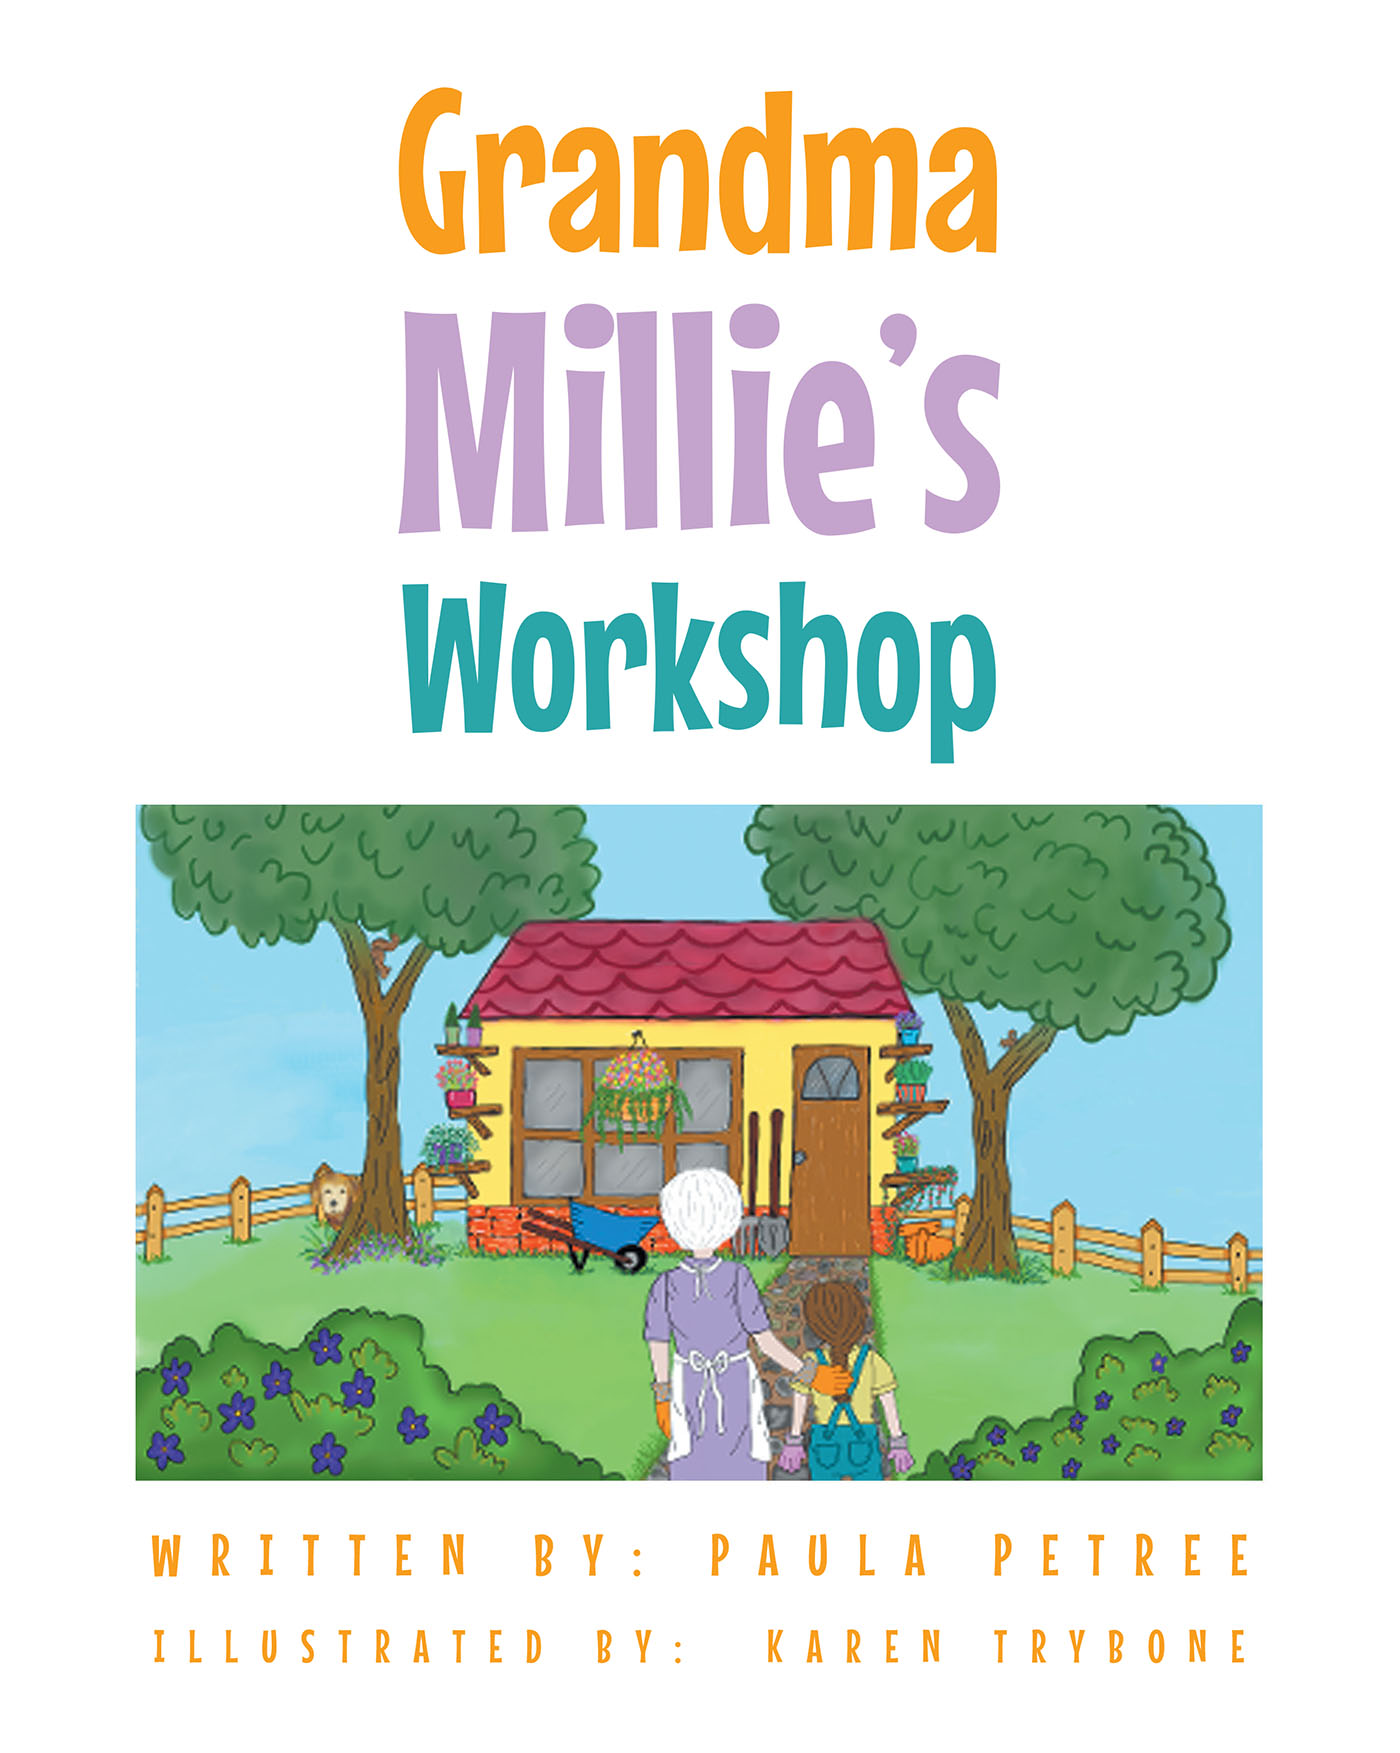 Paula Petree’s Newly Released "Grandma Millie’s Workshop" is a Nostalgic Celebration of the Importance Older Generations Hold in Young Lives